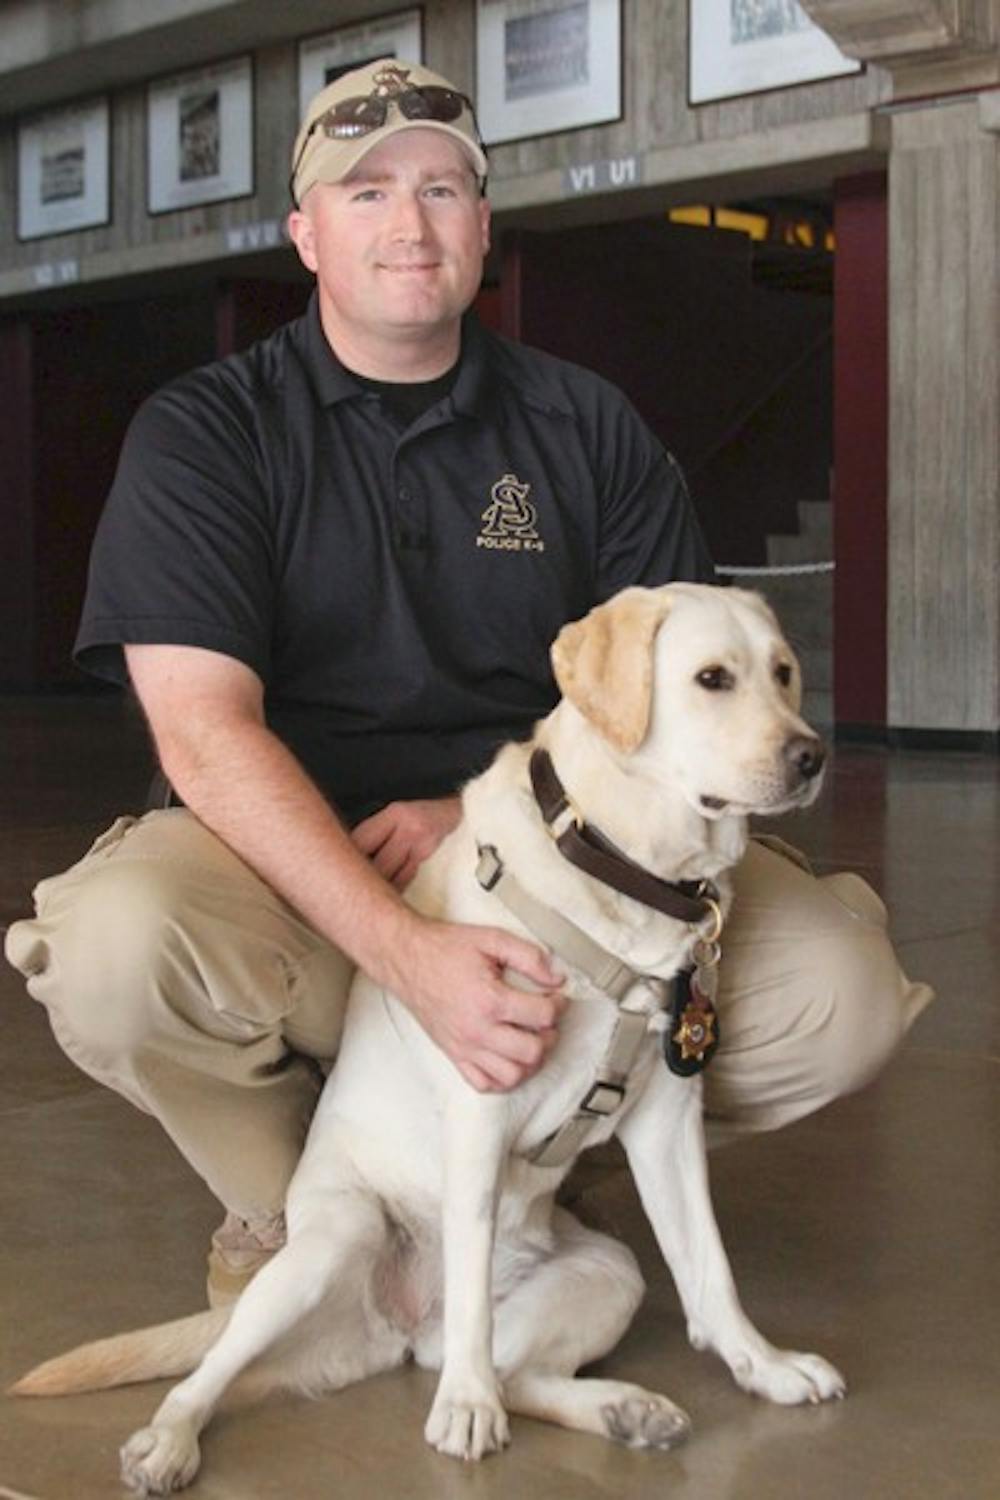 K-9 DETECTIVE: ASU's first police dog, Disney, poses with her handler Detective Parker Dunwoody.  Disney is specially trained to smell explosives and firearms and will be used for on-campus security. (Photo by Lisa Bartoli)